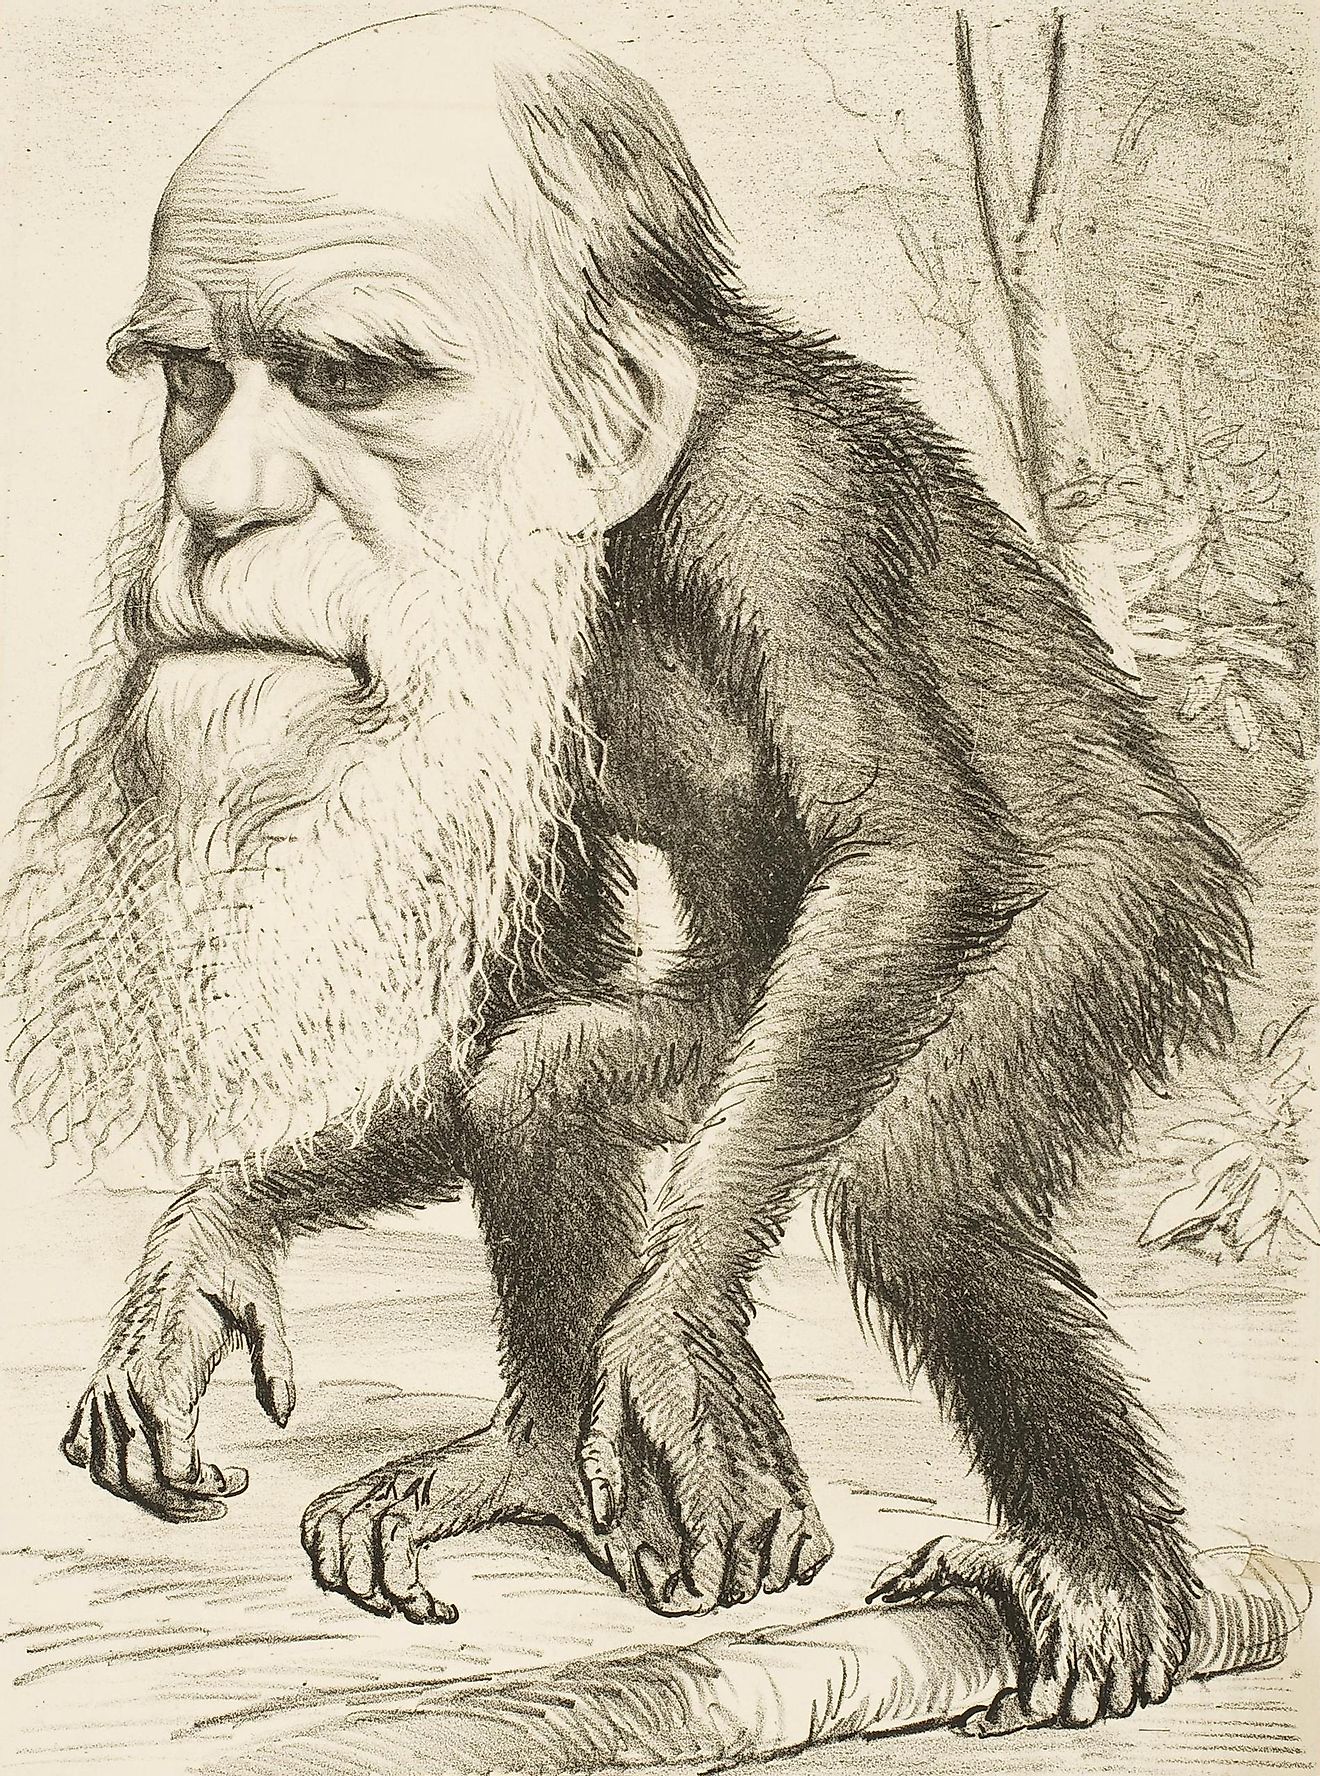 An 1871 caricature following publication of The Descent of Man was typical of many showing Darwin with an ape body, identifying him in popular culture as the leading author of evolutionary theory. Image credit: Wikimedia.org